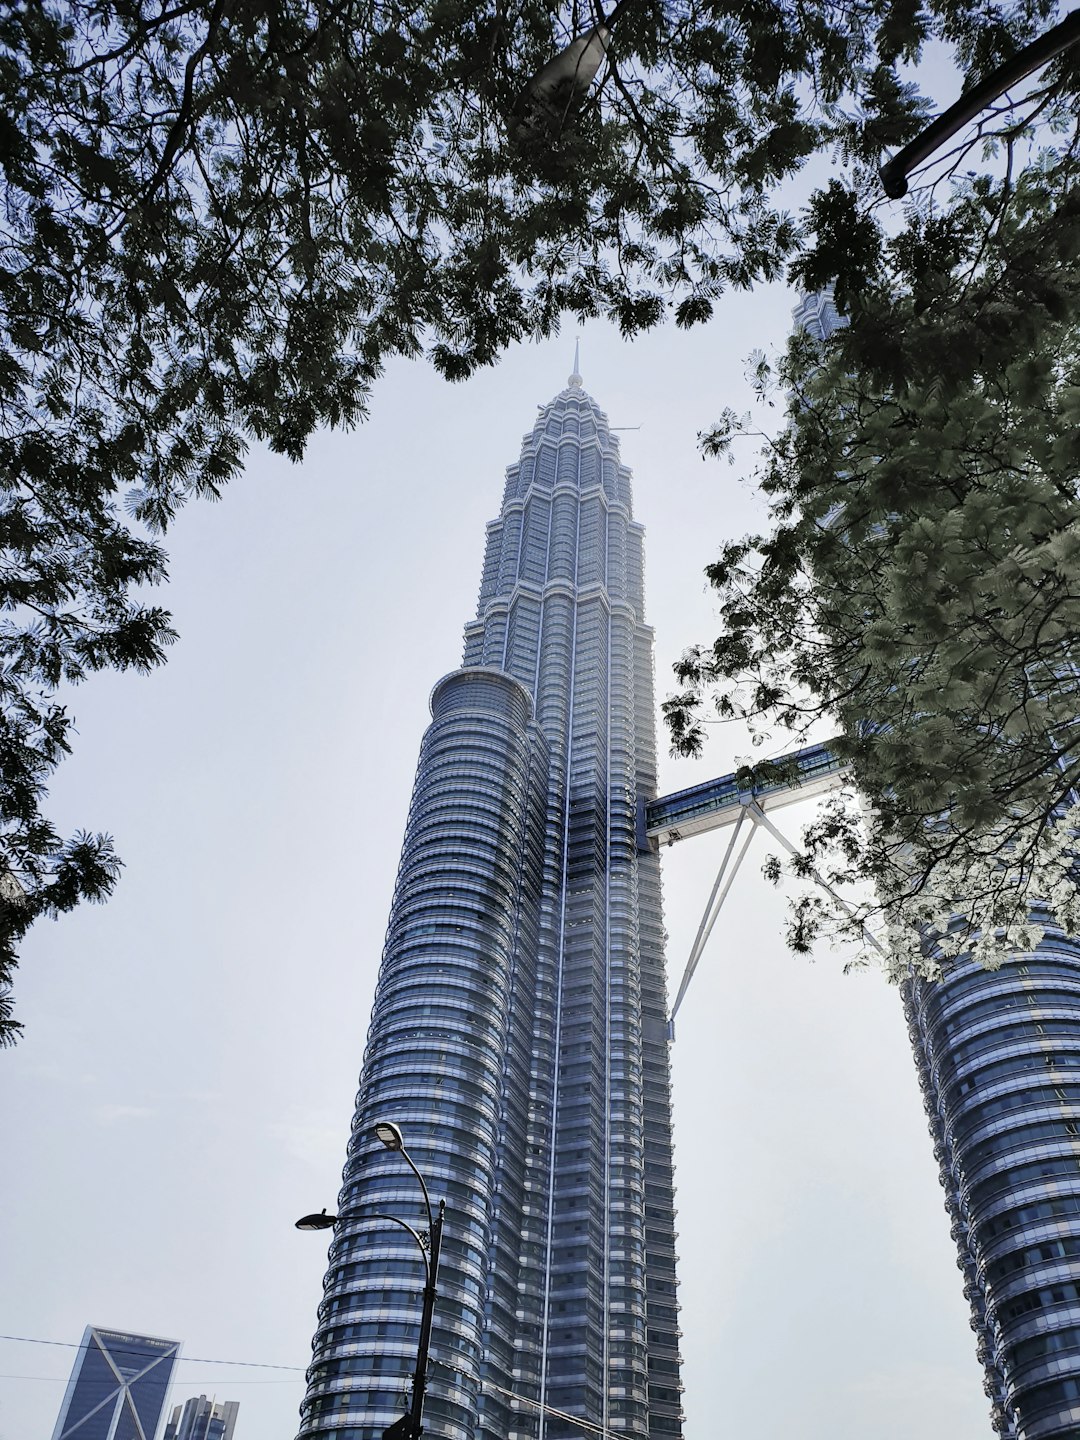 travelers stories about Landmark in Petronas Twin Tower, Malaysia